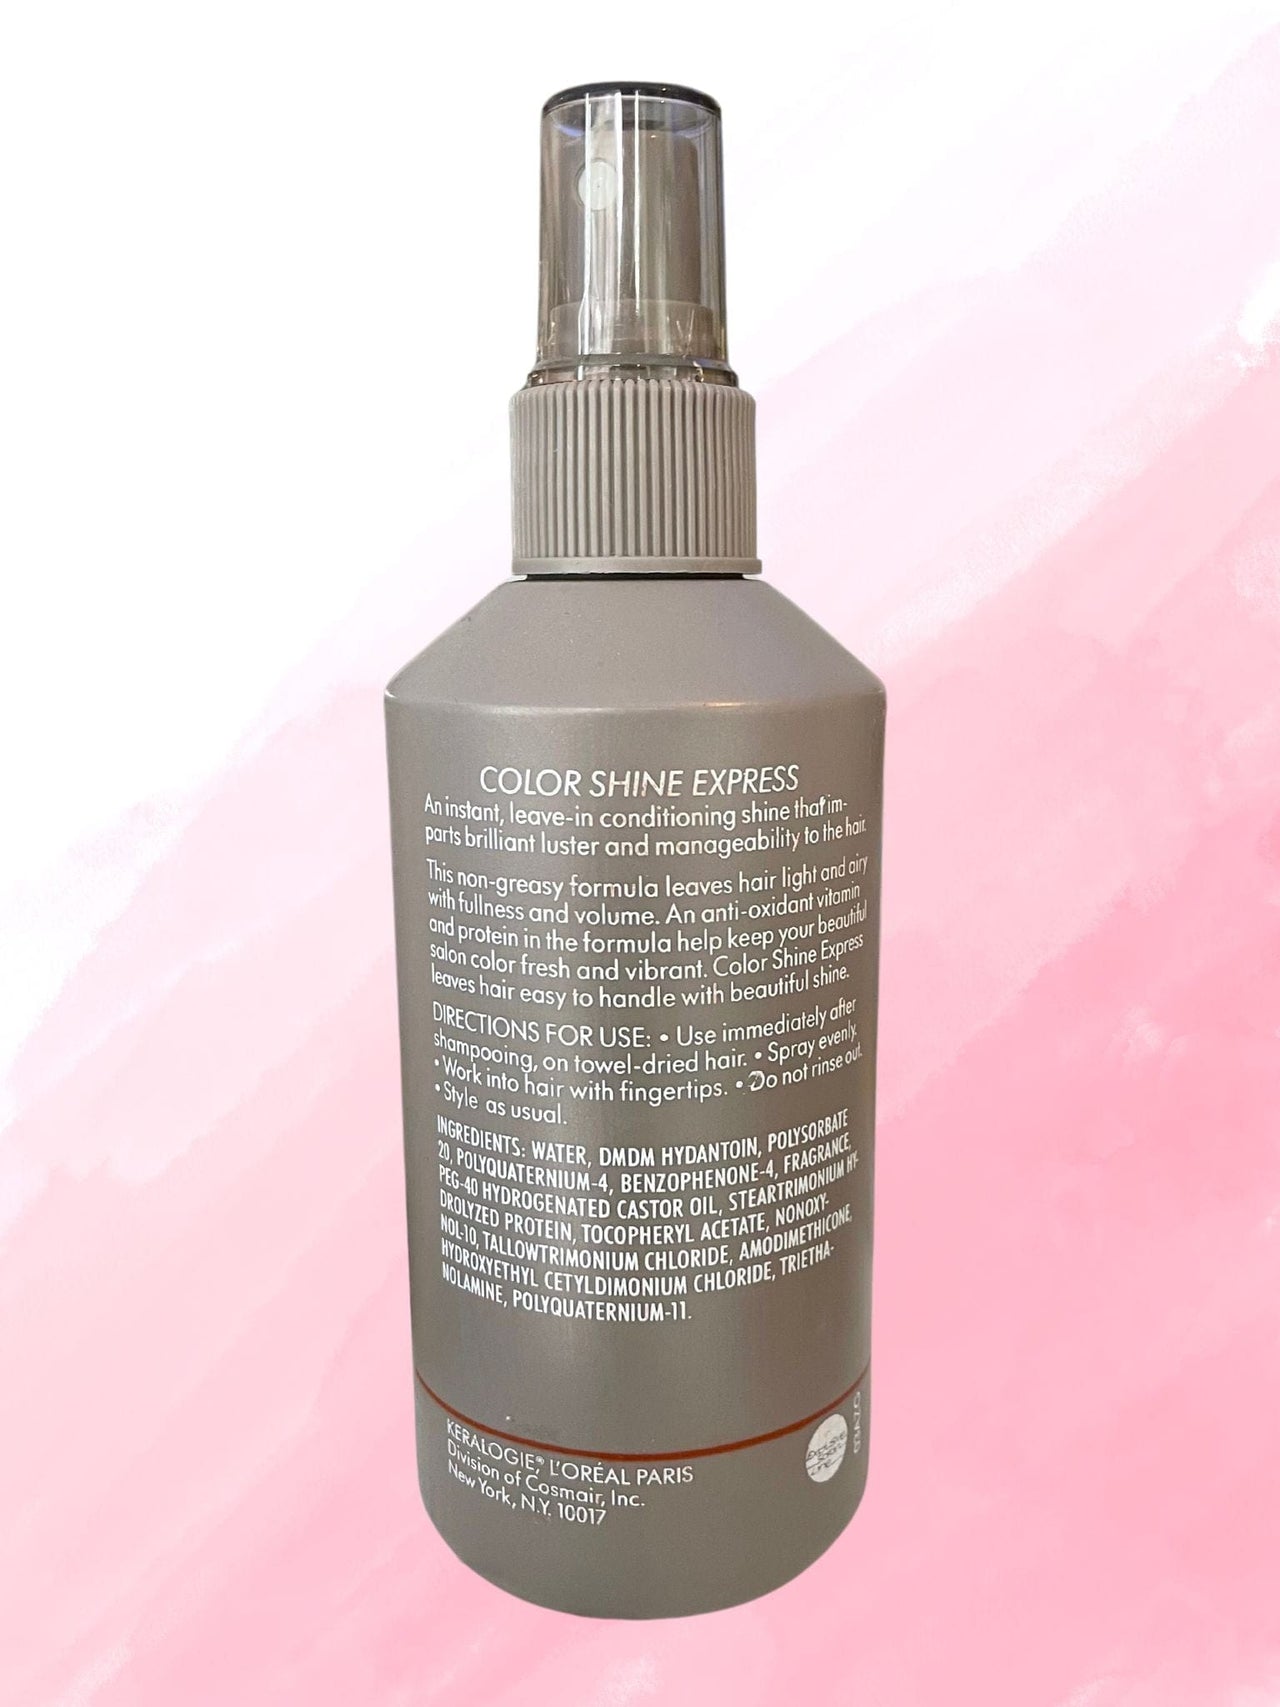 KERALOGIE_Iridiance Color Shine Express 236ml_Cosmetic World